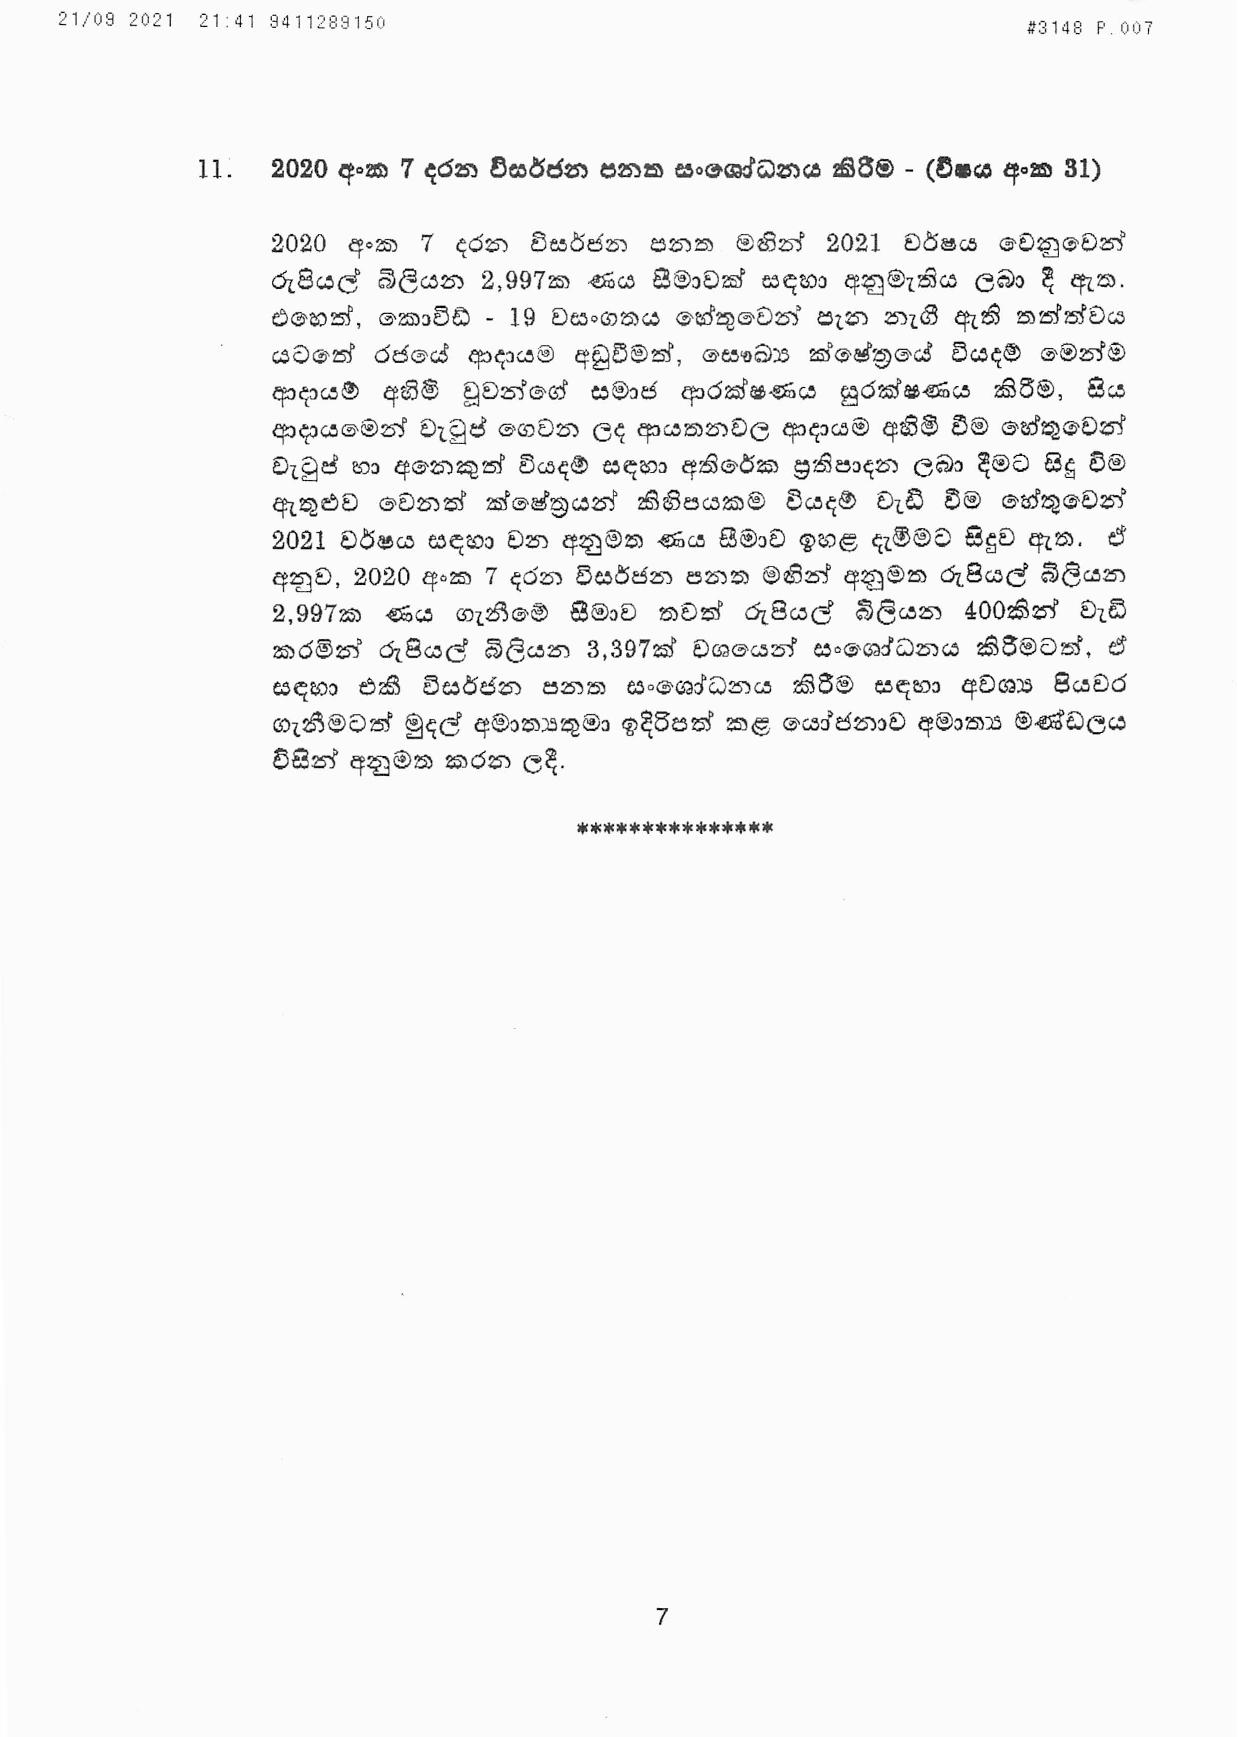 Cabinet Decisions on 21.09.2021 page 007